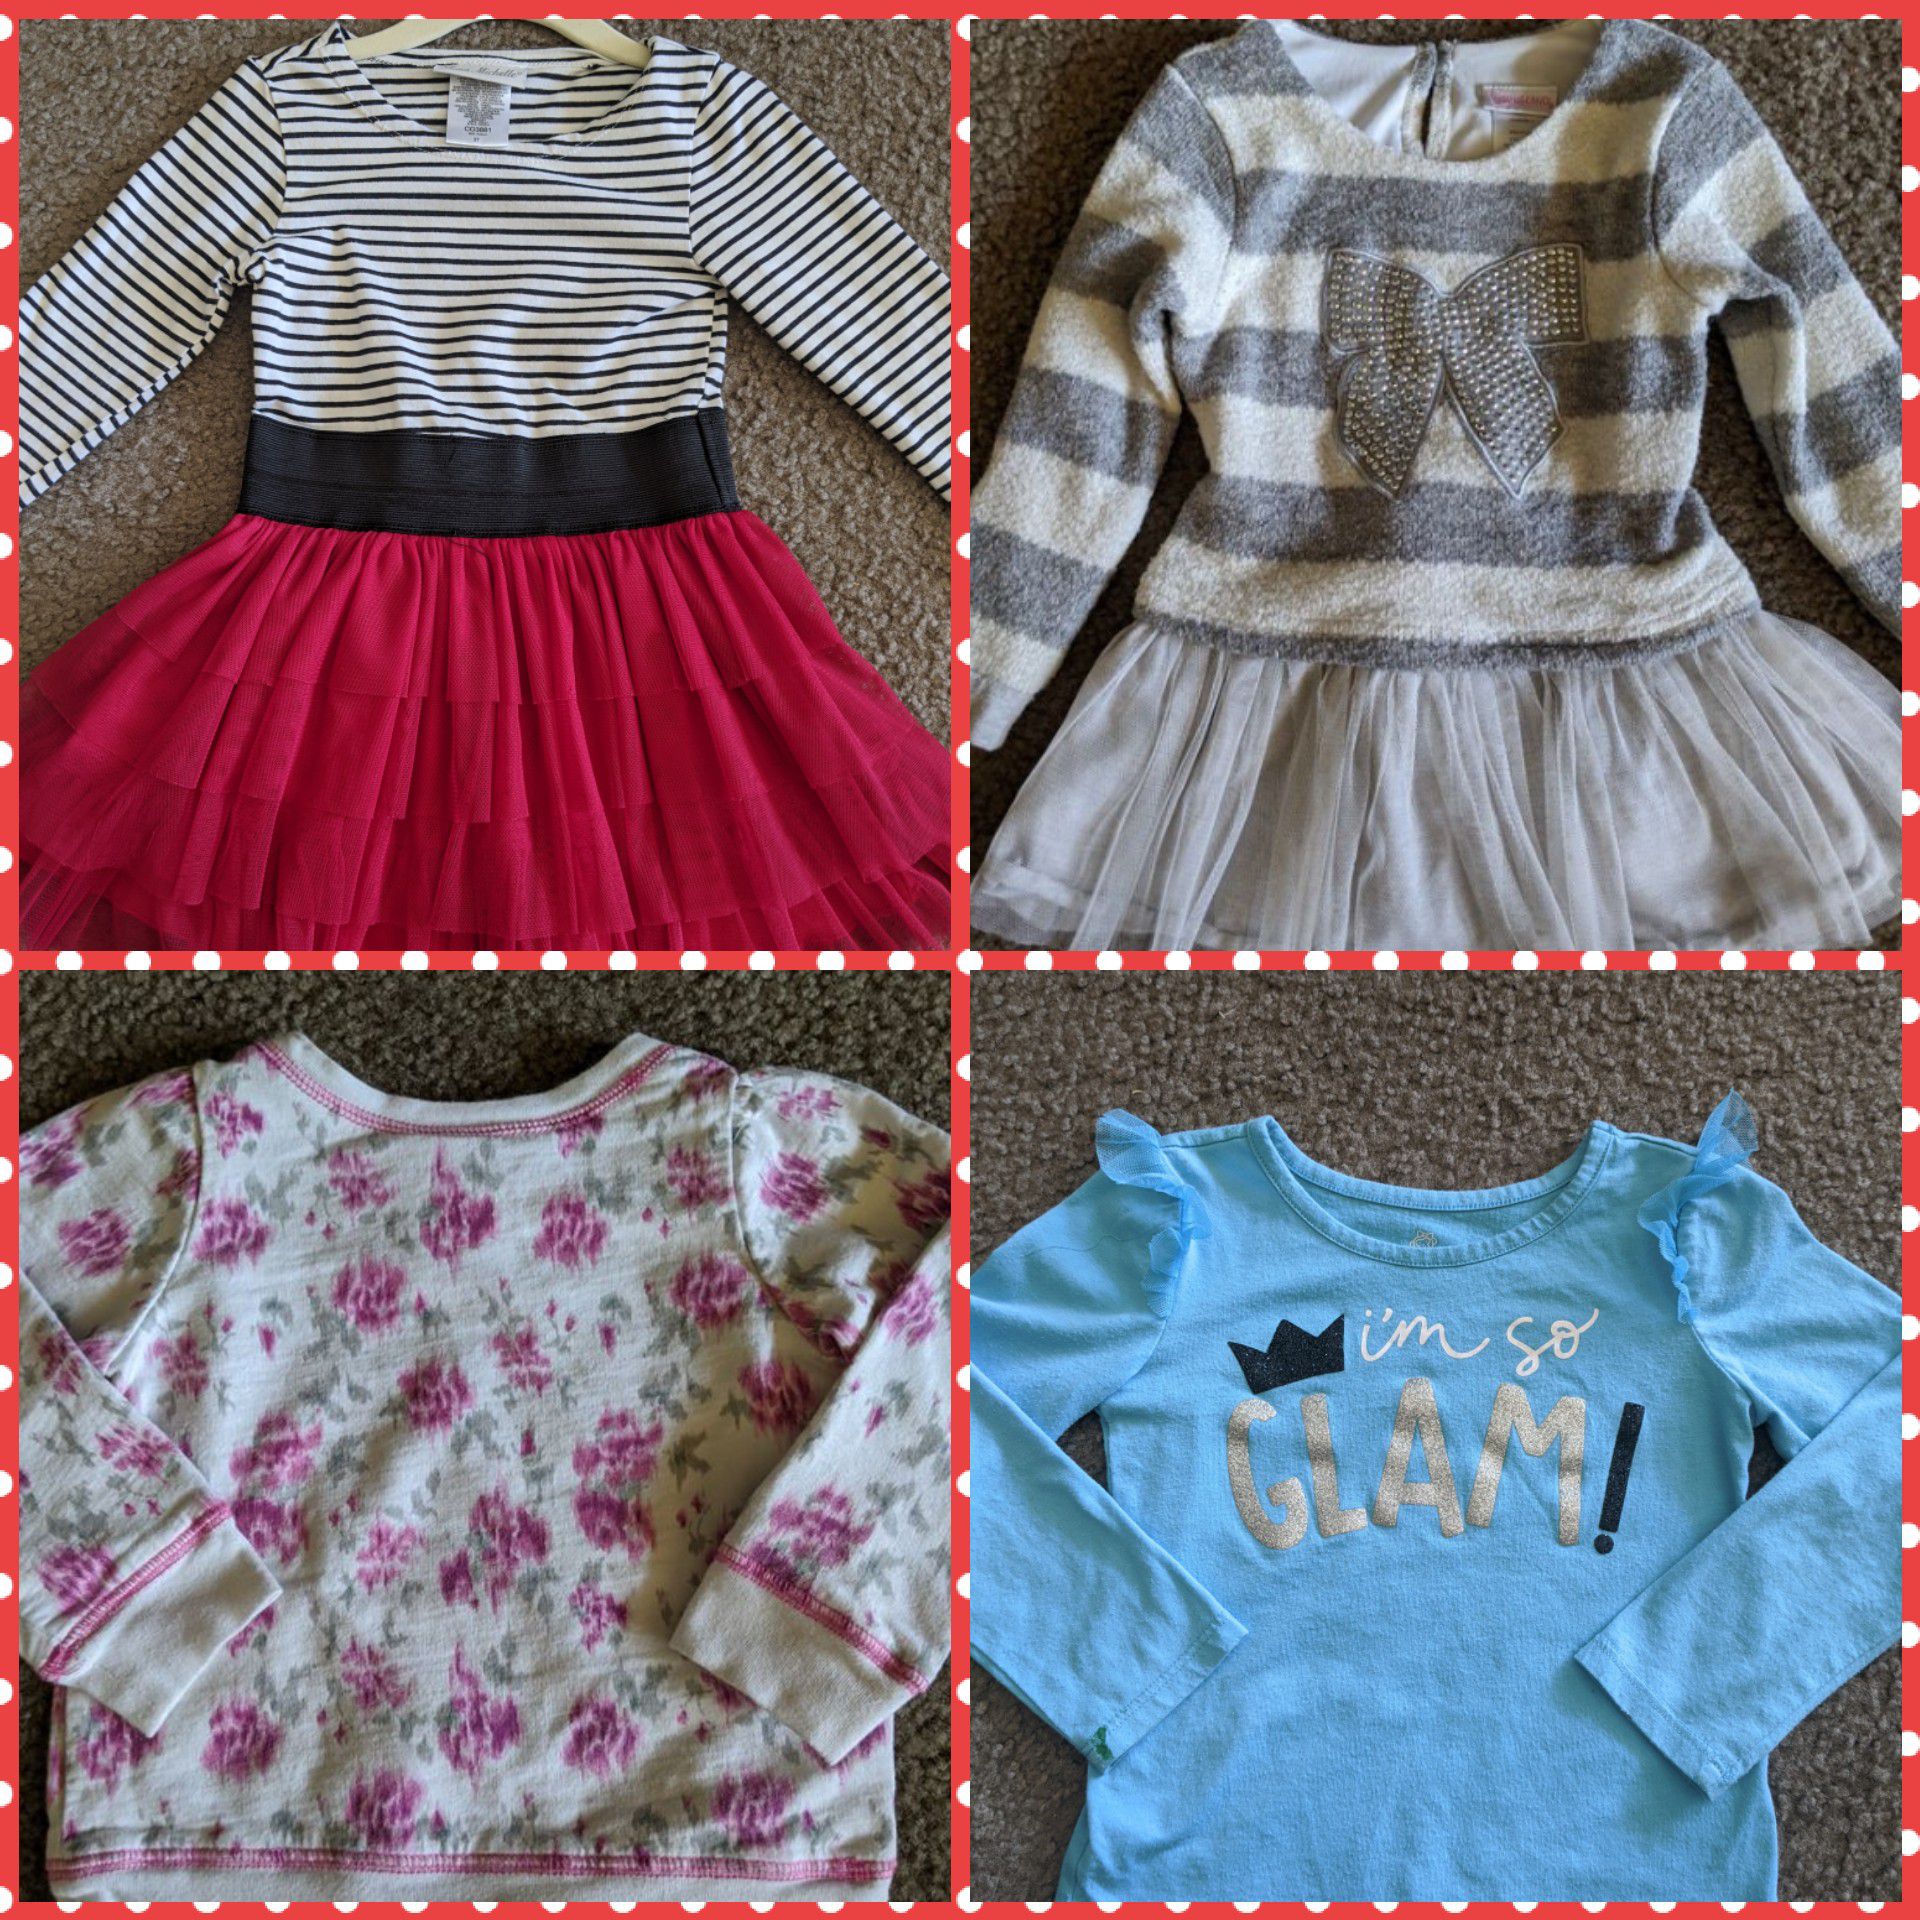 5 PC. Girls 3T Winter Clothes/Clothing Lot/Bundle| Sweater Dress / Top + Fleece Lined Leggings + Top + Jeans